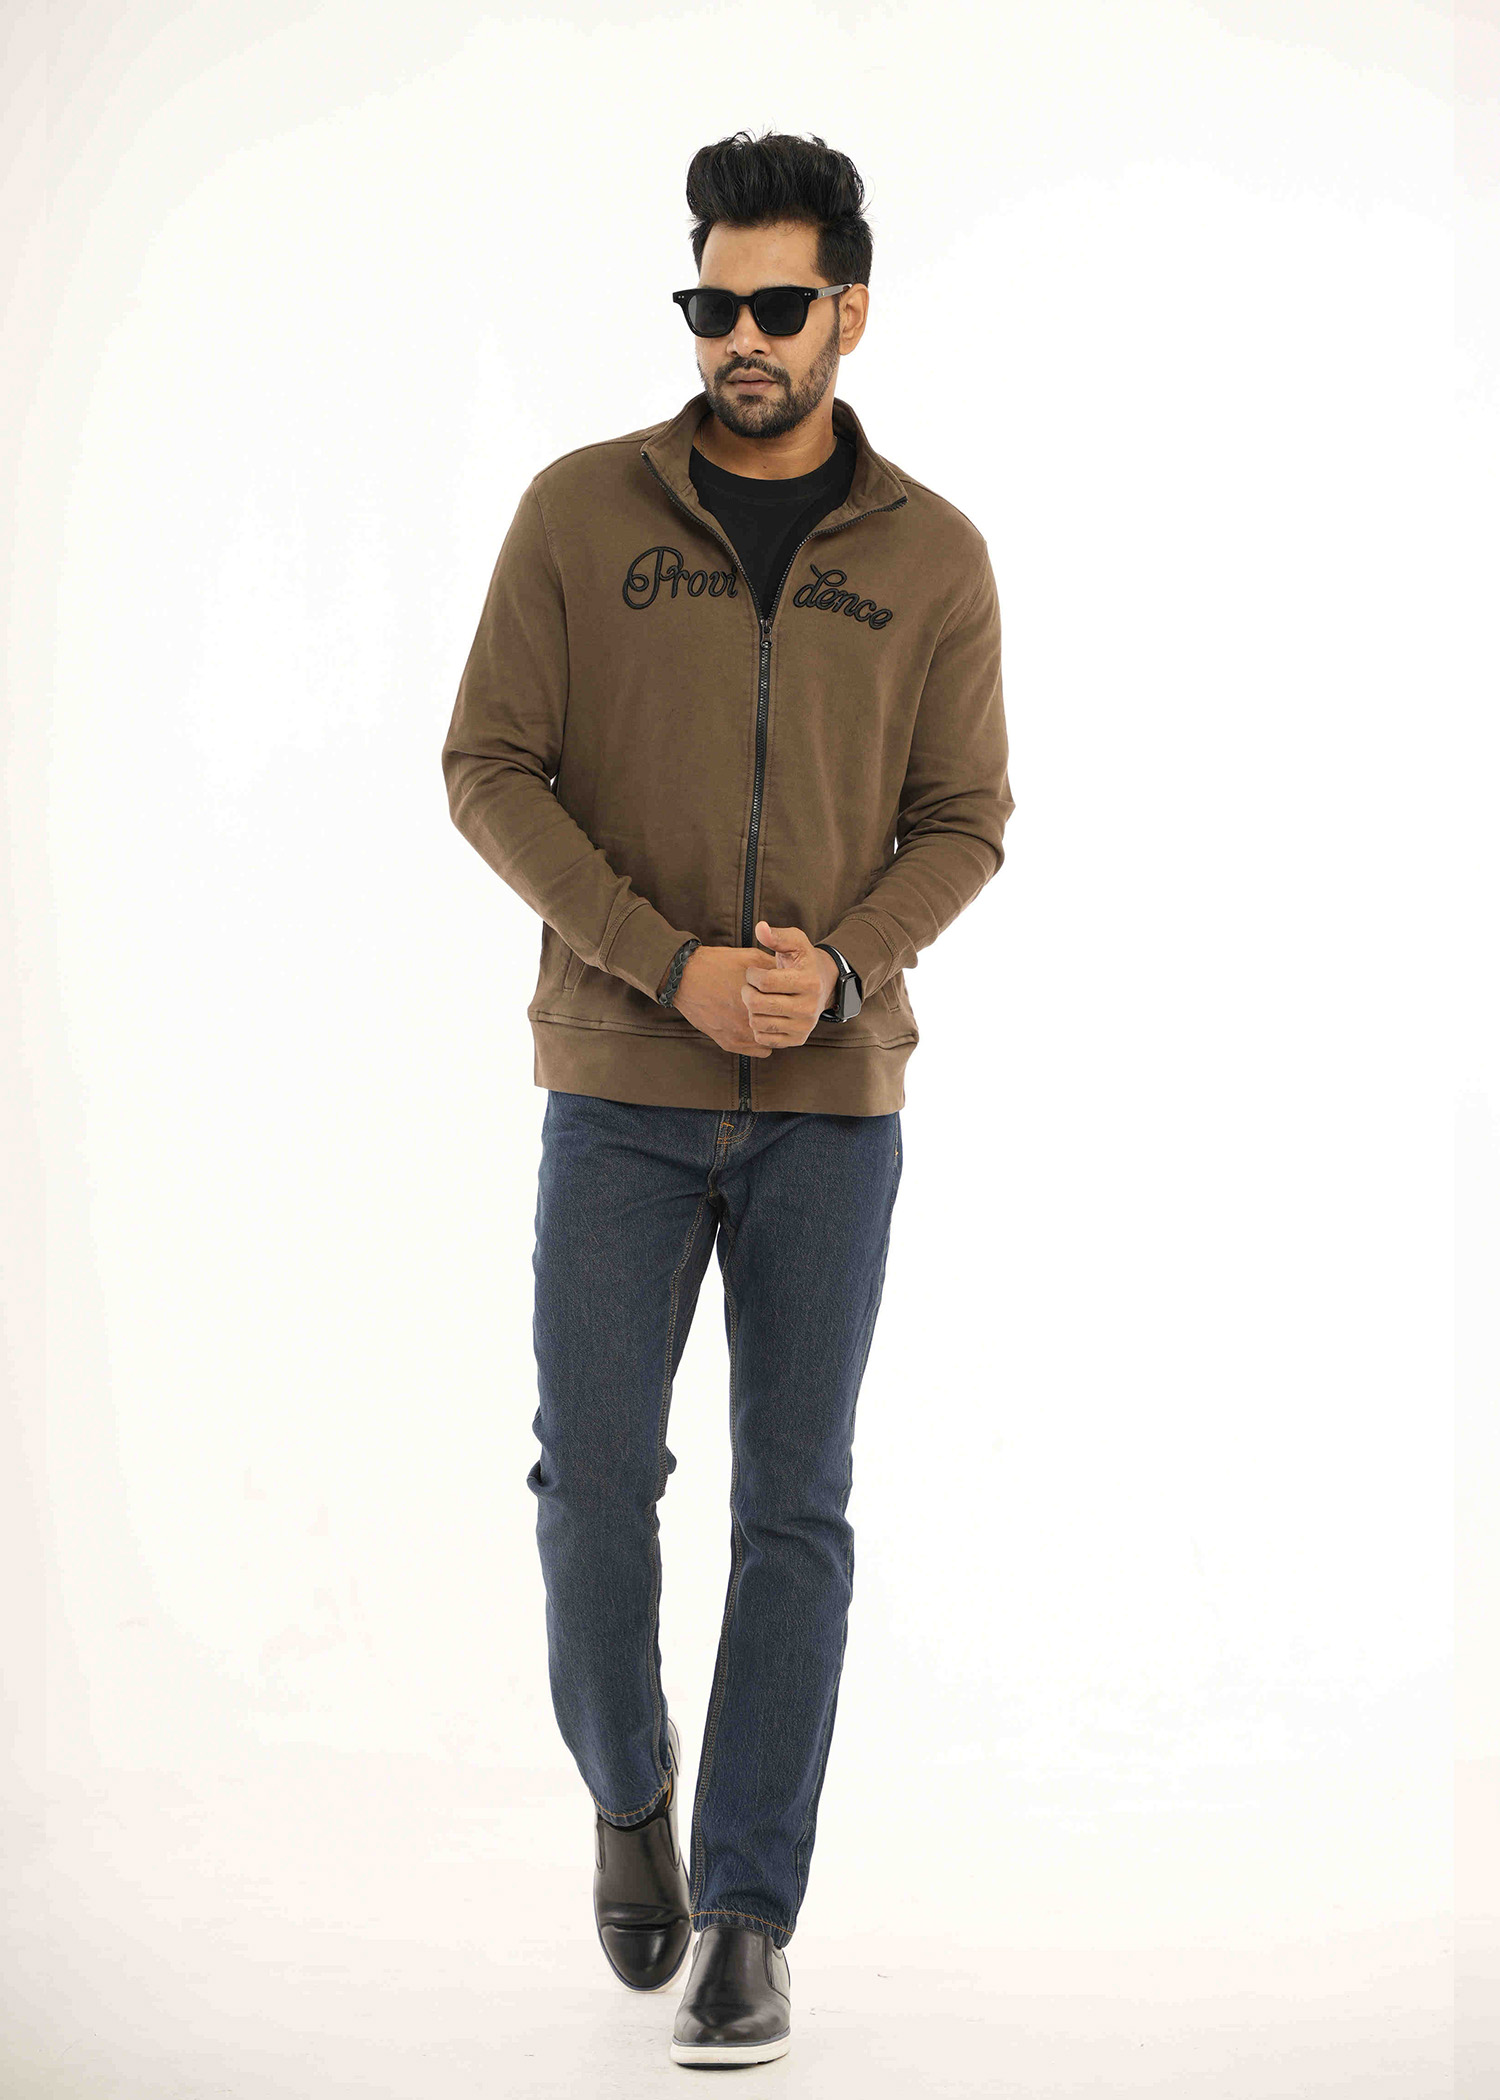 surfscoter ii non denim jacket brown color full view